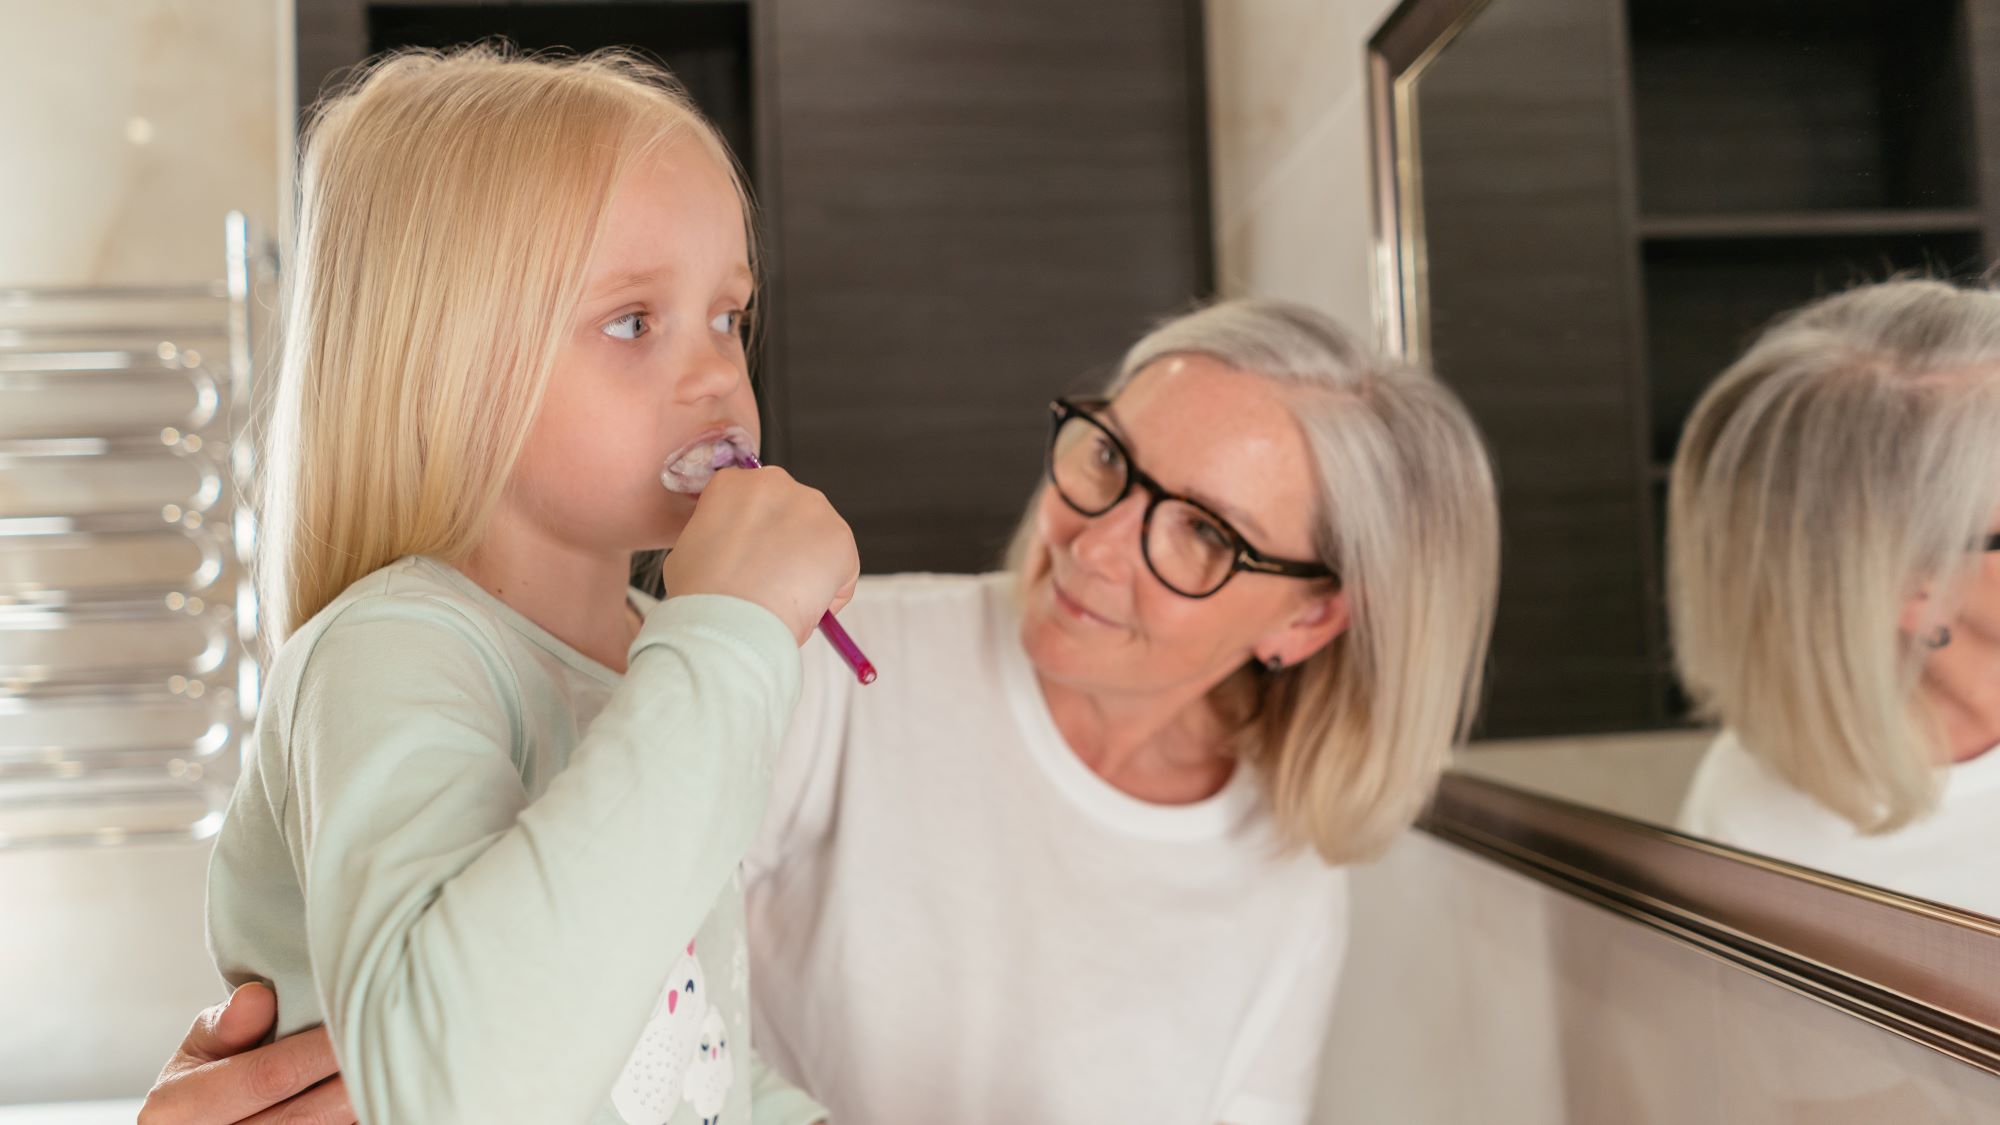 Child and mother brushing teeth.